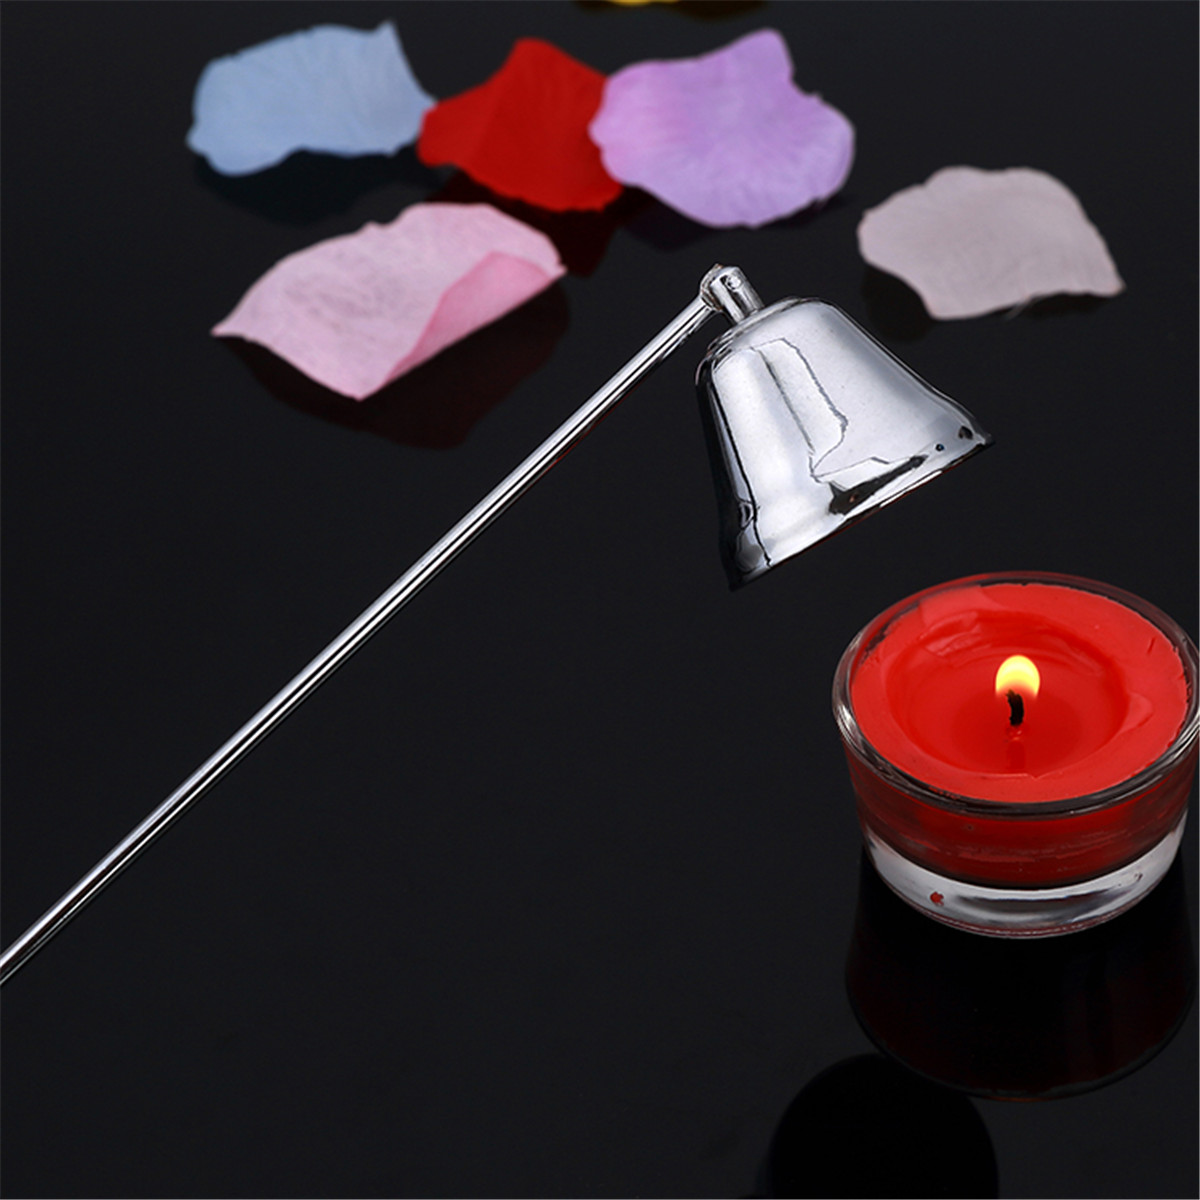 Stainless-Steel-Candle-Snuffer-Silver-Long-Extinguisher-for-Tea-Light-Candle-Tool-1252840-7